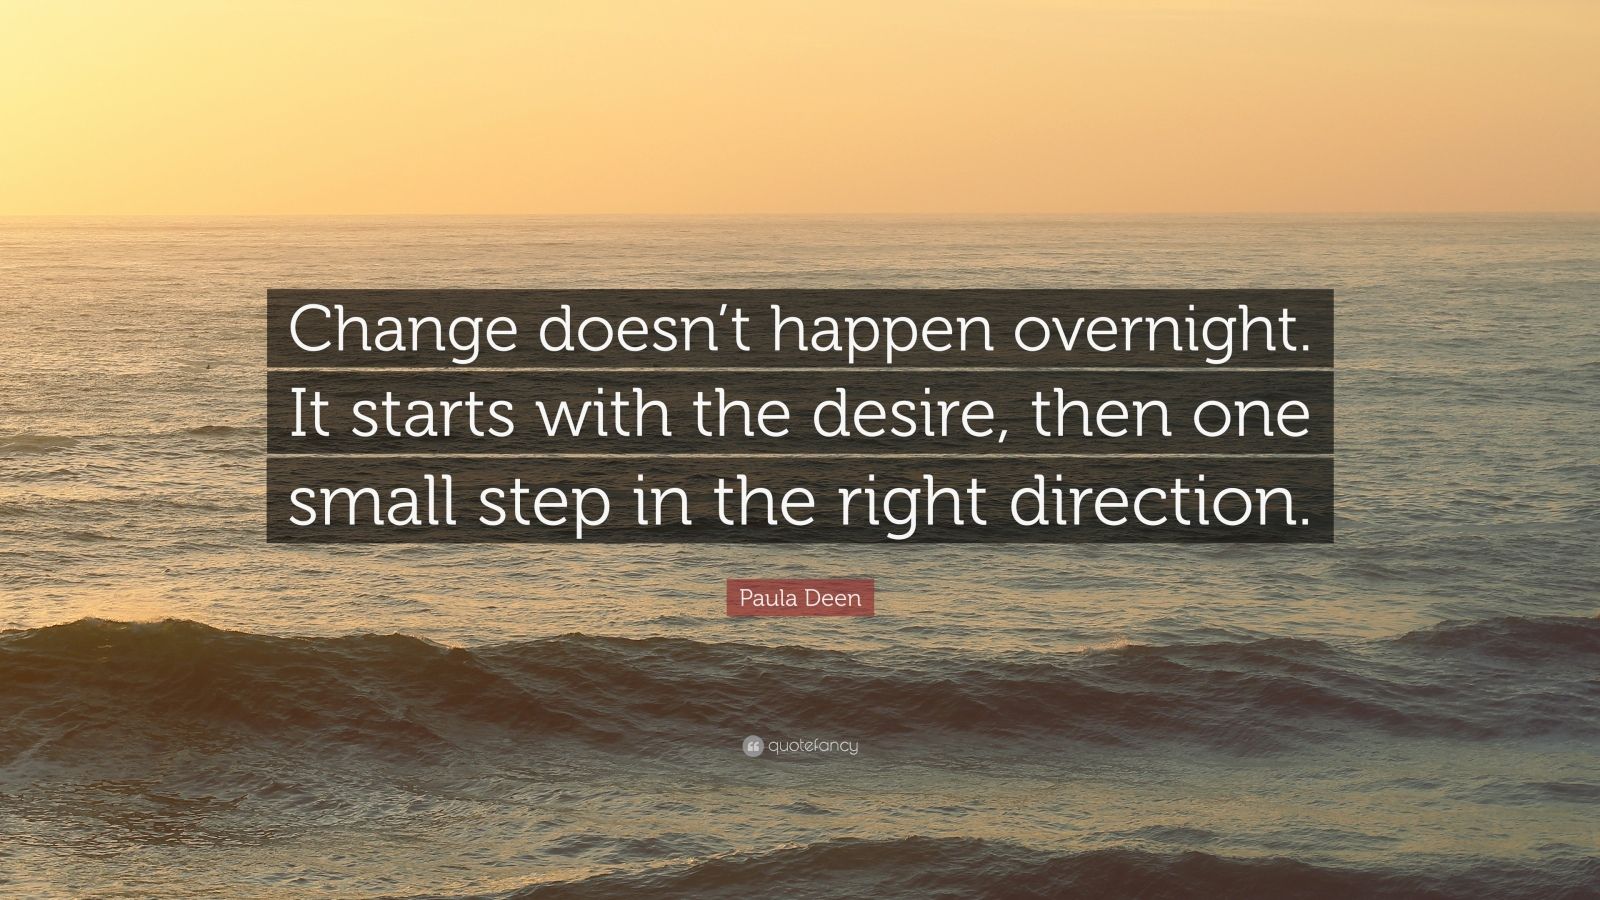 Paula Deen Quote: “Change doesn’t happen overnight. It starts with the